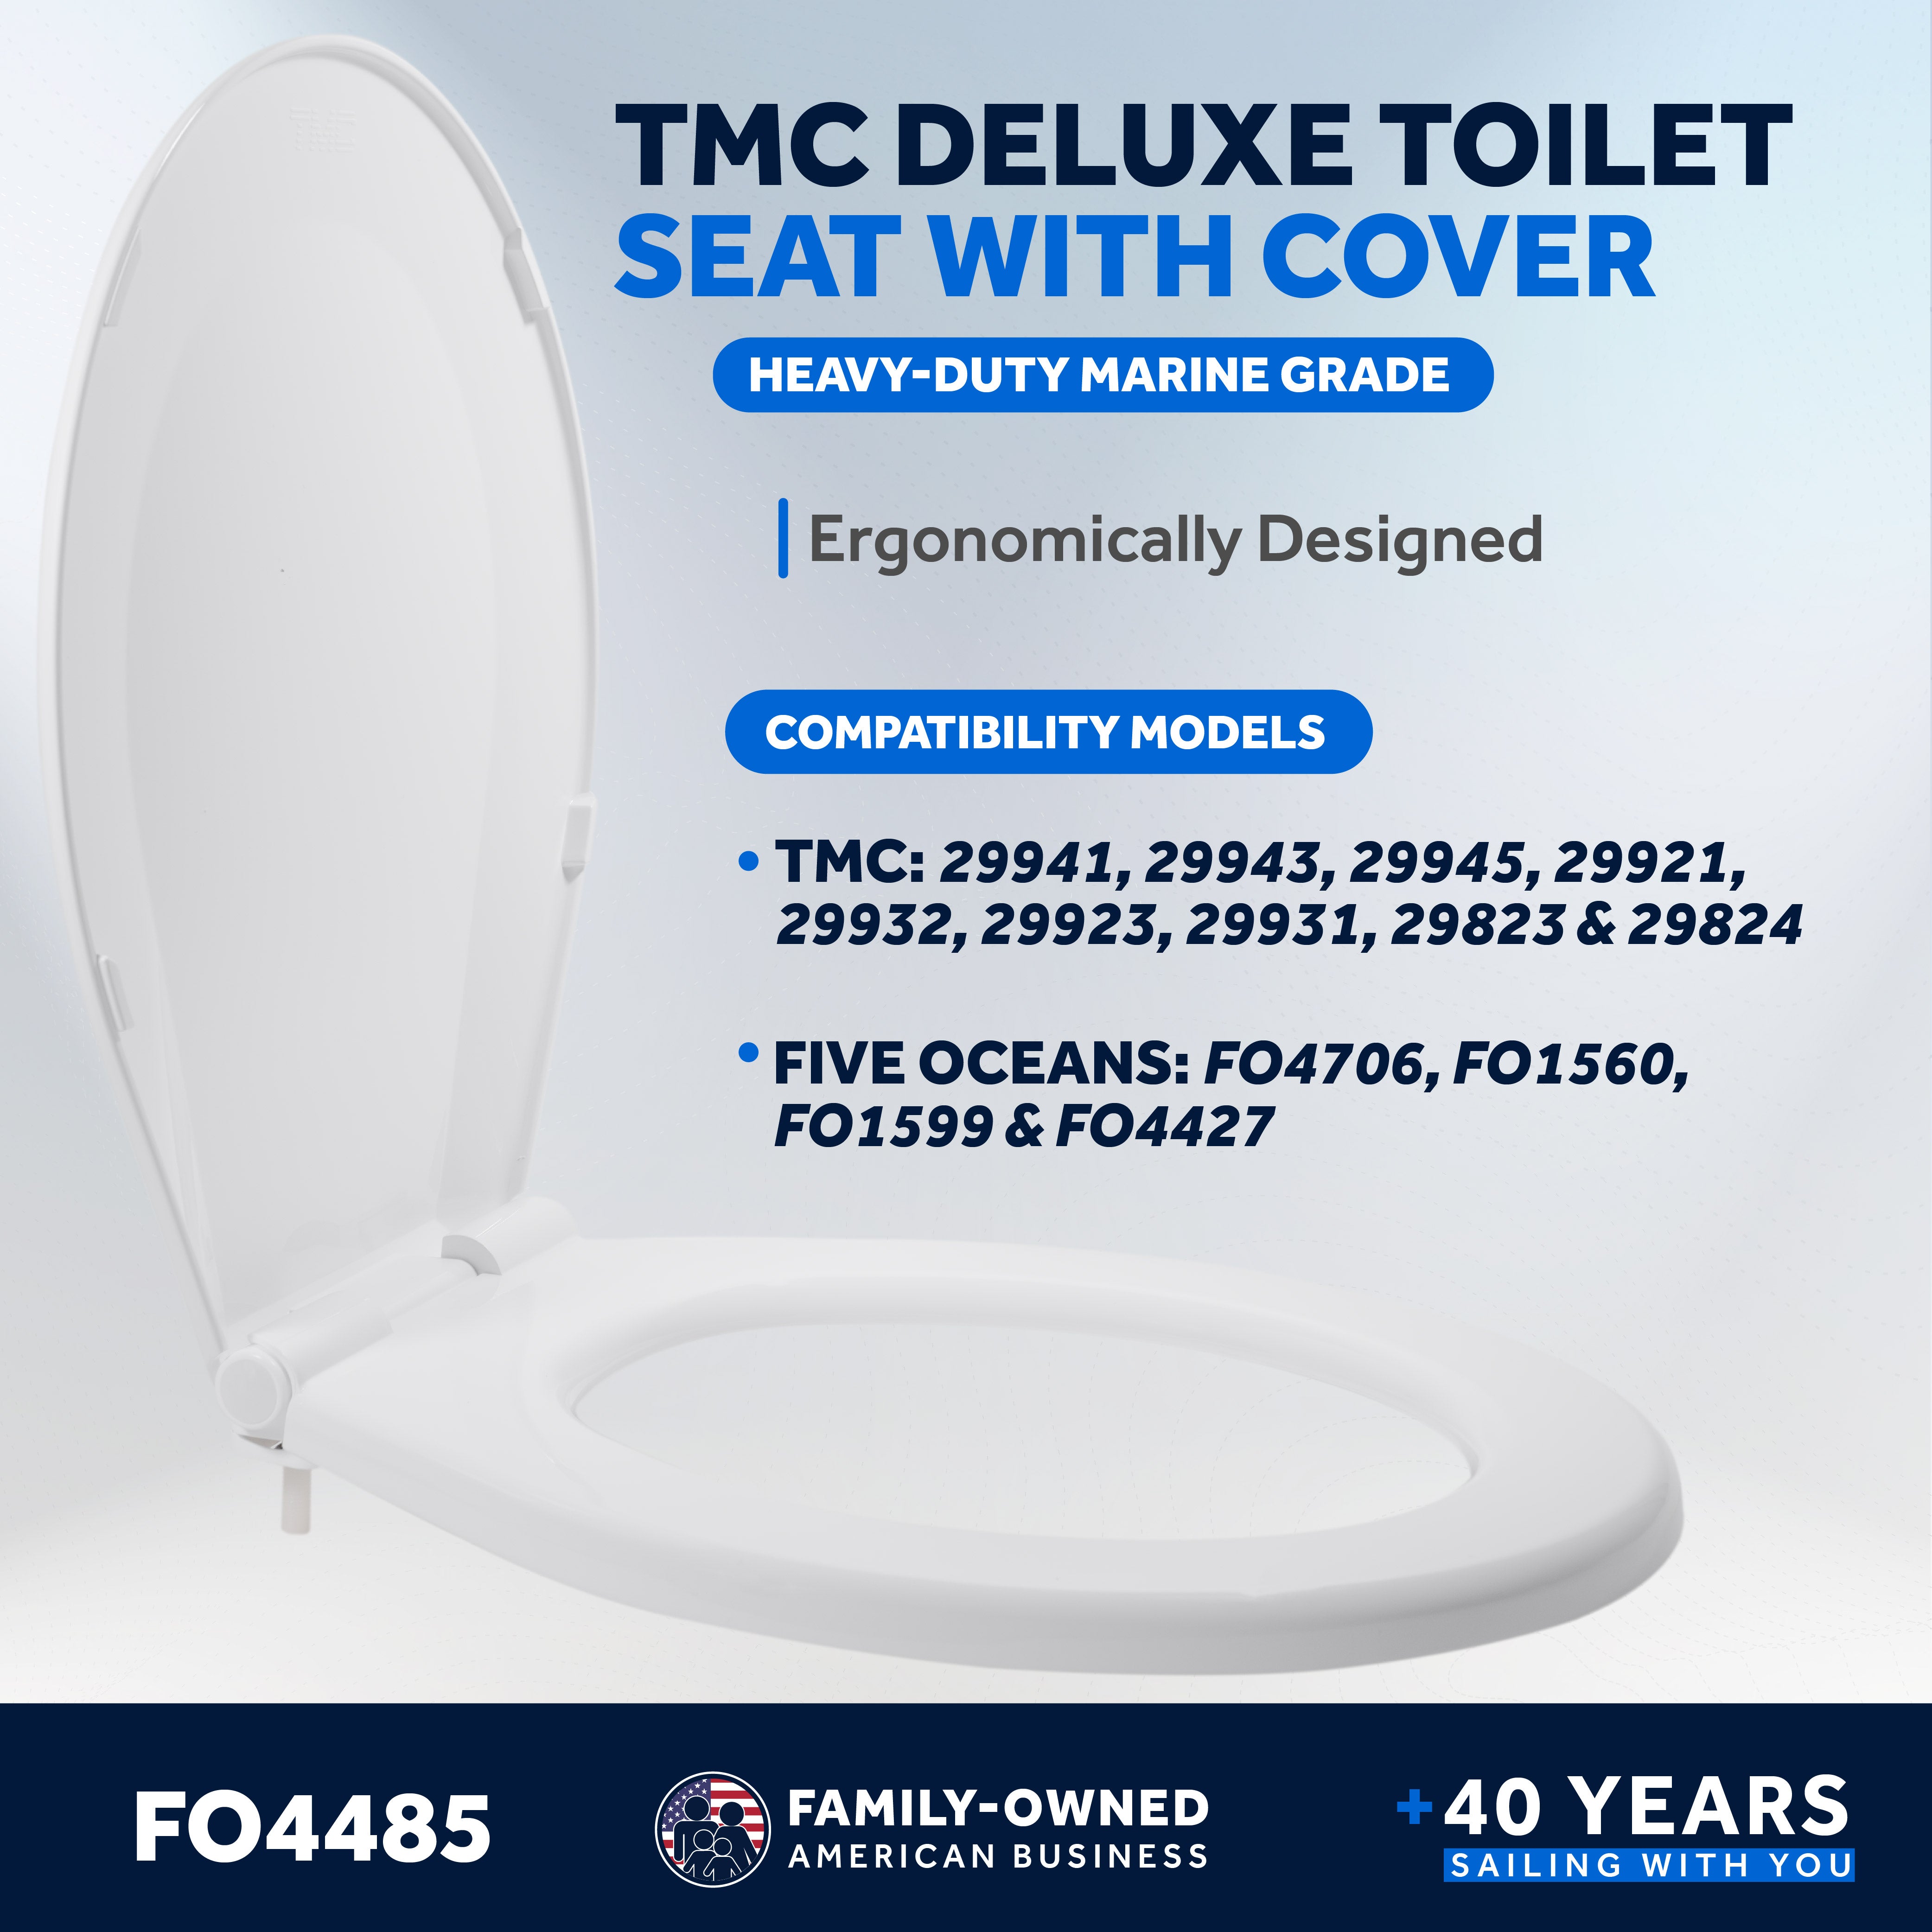 TMC Deluxe Toilet Seat with Cover - FO4485